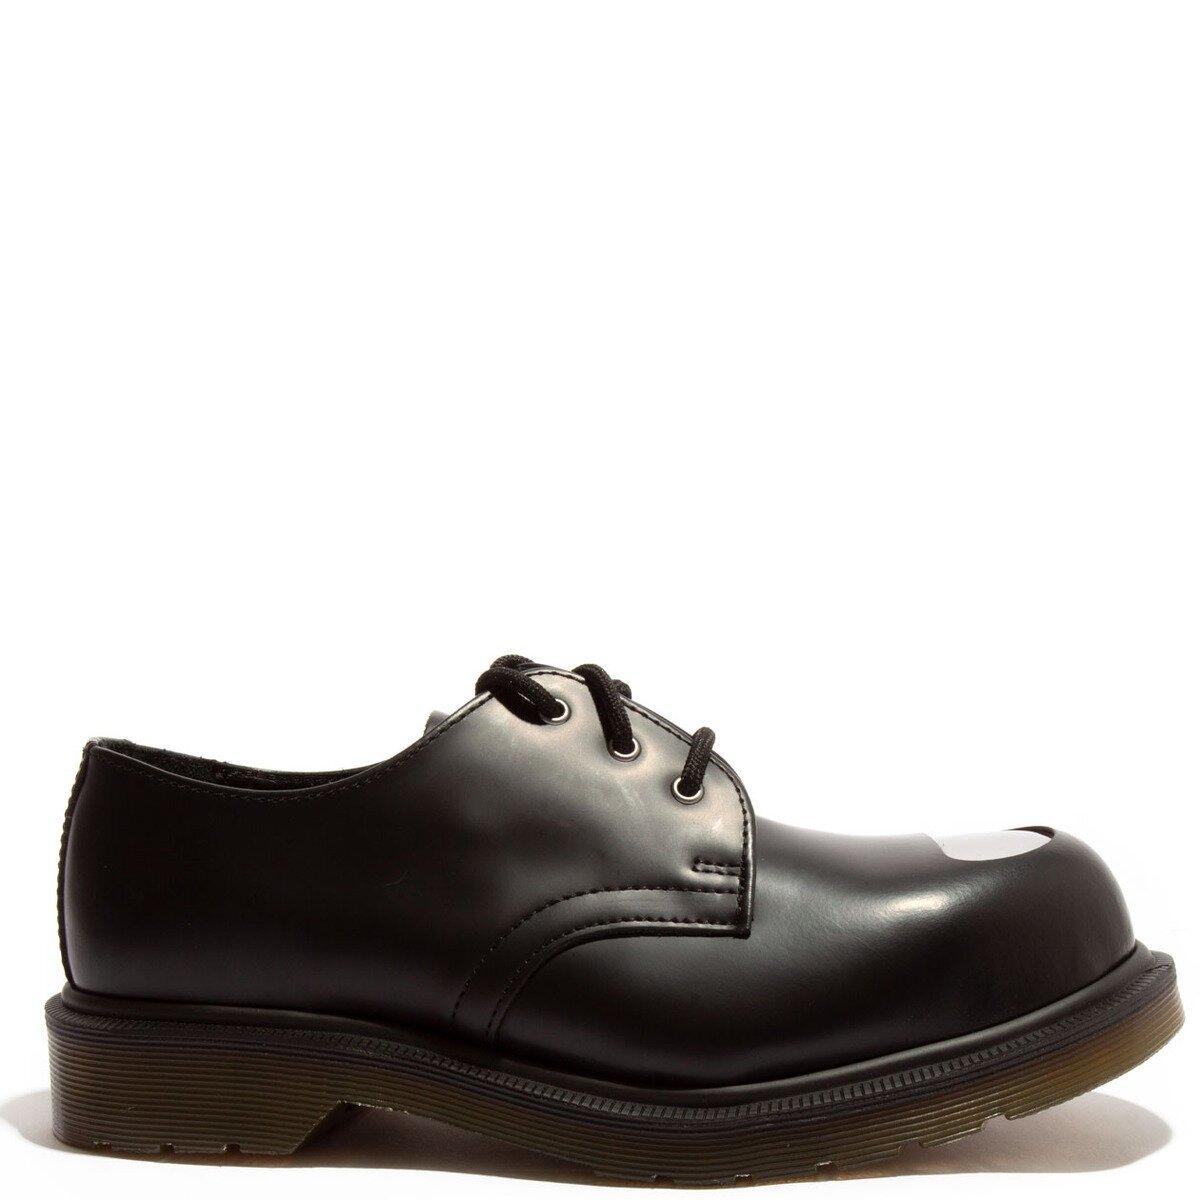 Dr. Martens 1925 Exposed Steel Toe Leather Shoes in Black | Lyst